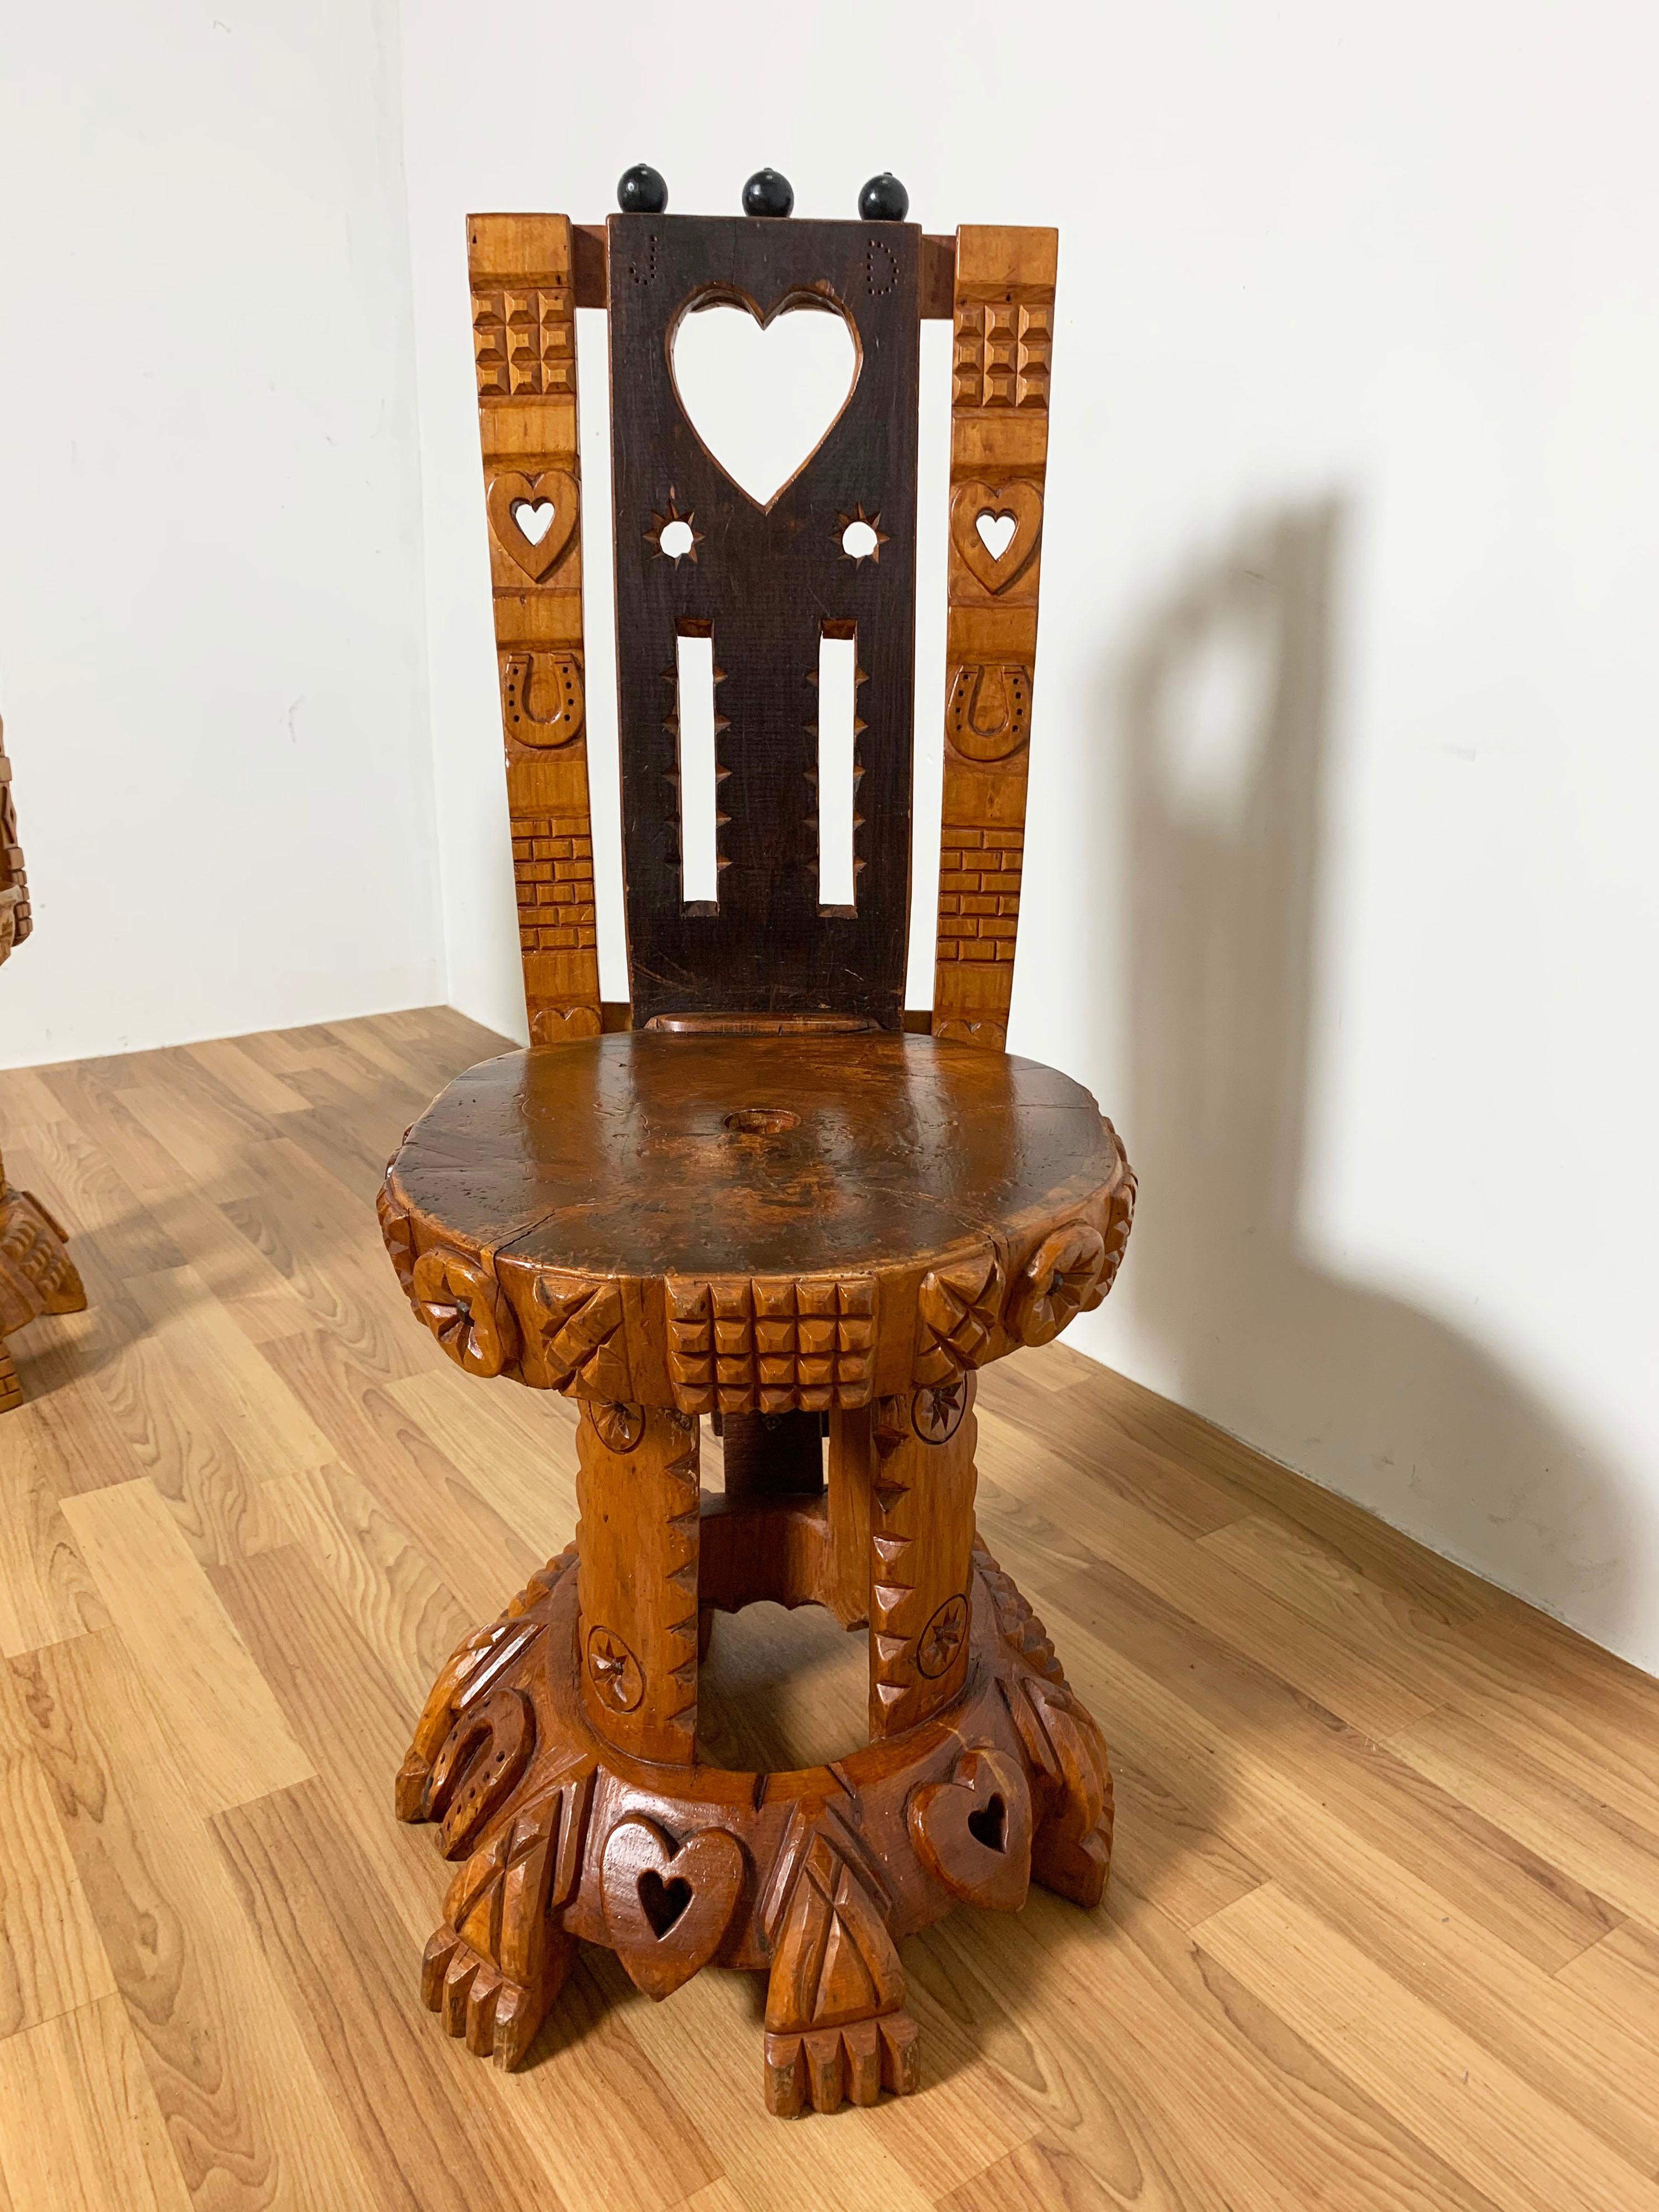 Hand Carved Folk Art Chairs by Joseph Deveau, Circa 1950s For Sale 10